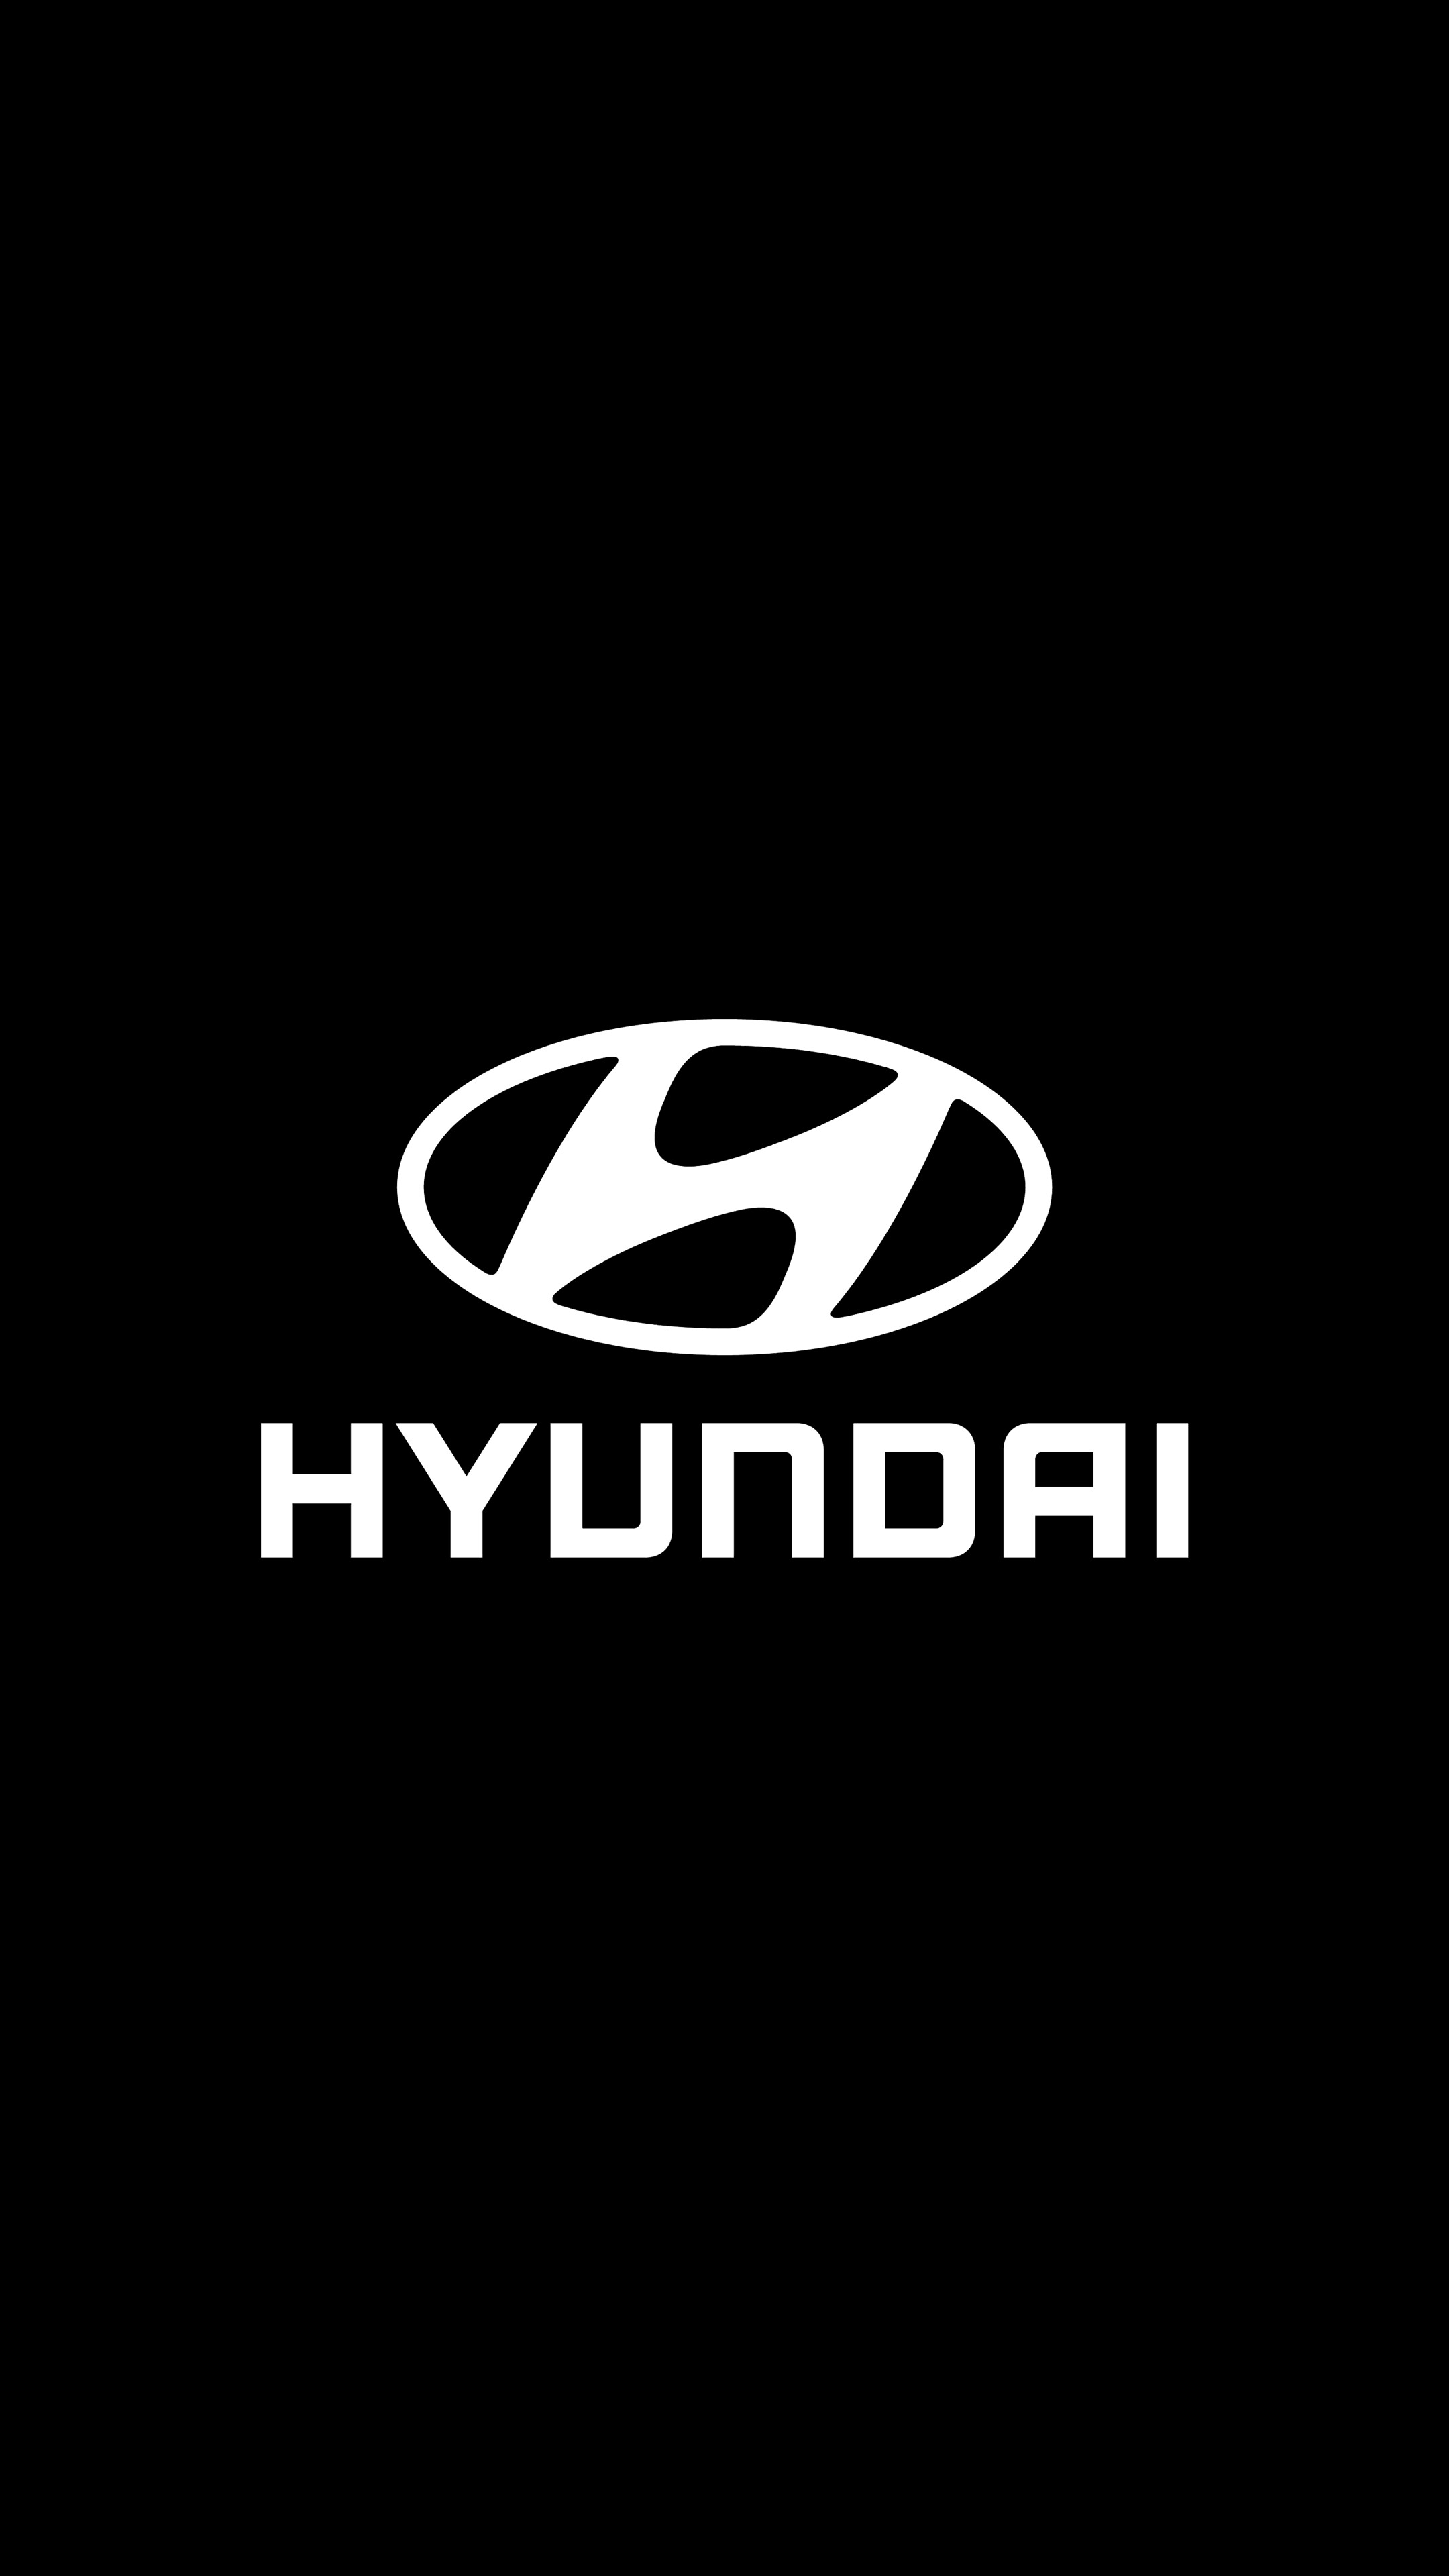 Hyundai: A South Korean automotive manufacturer founded in 1967. 2160x3840 4K Wallpaper.